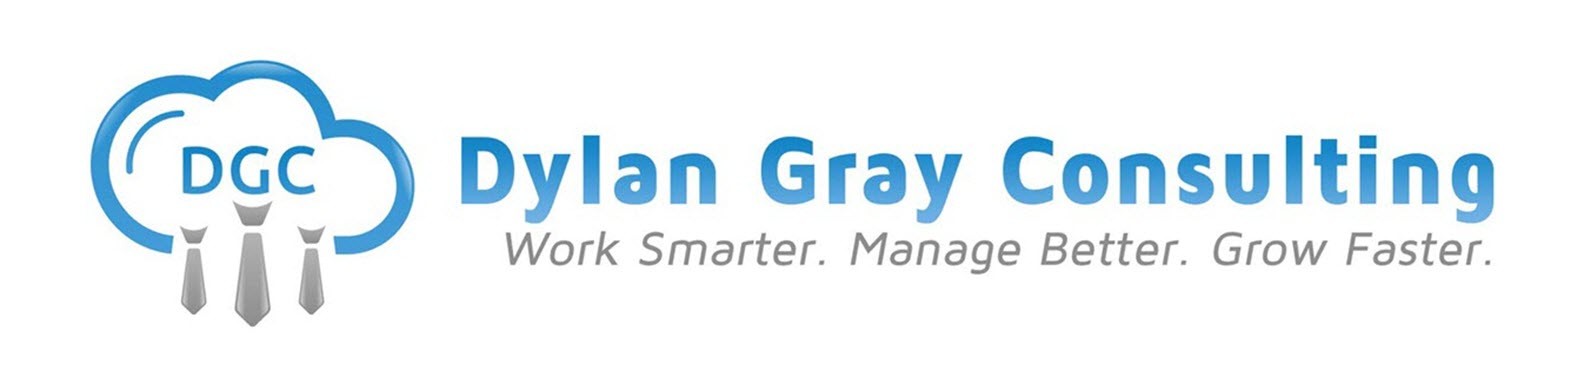 Dylan Gray Consulting